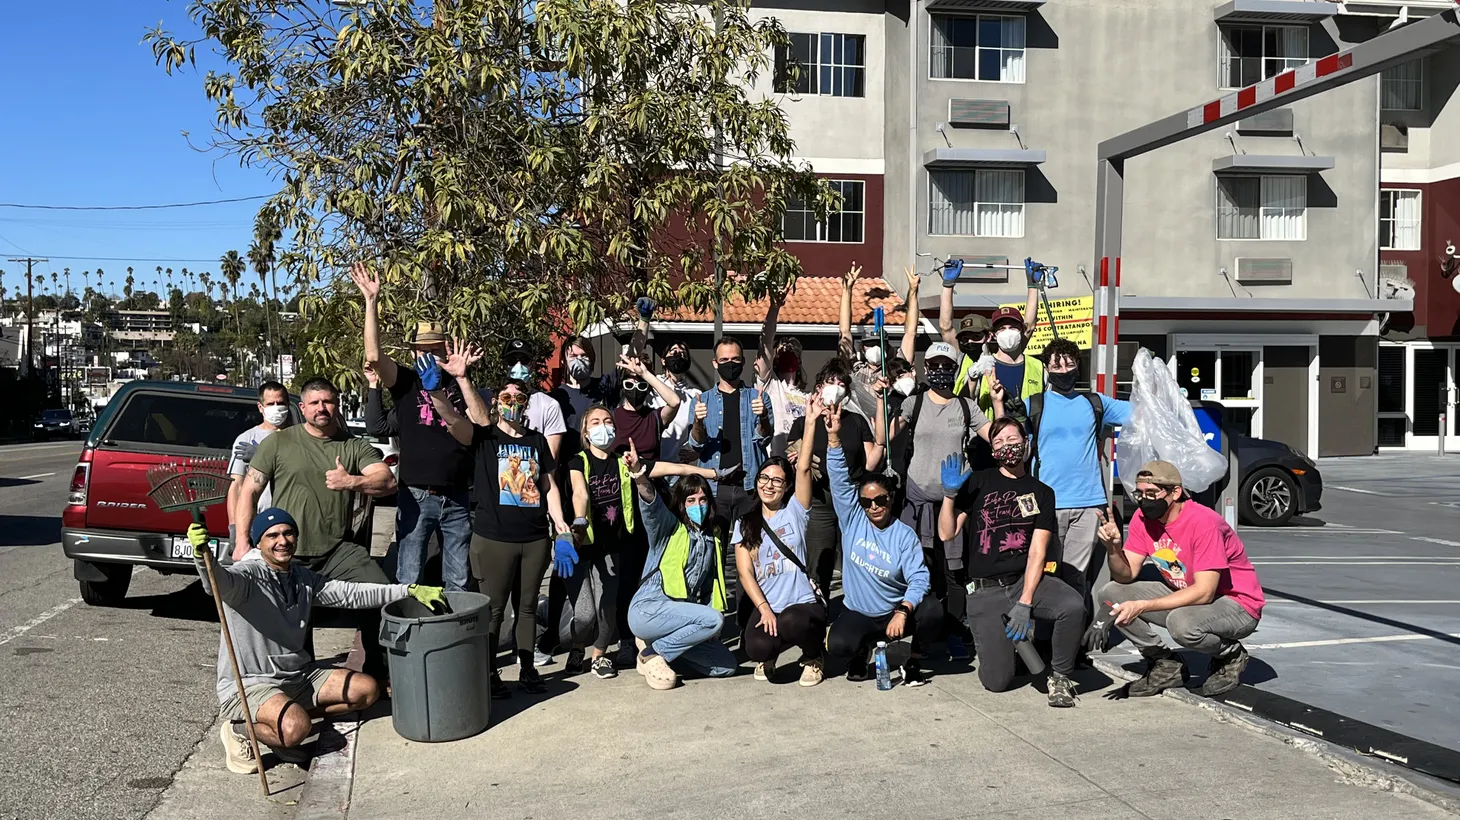 The Echo Park Trash Club focuses on keeping their neighborhood clean while respecting people who are unhoused.